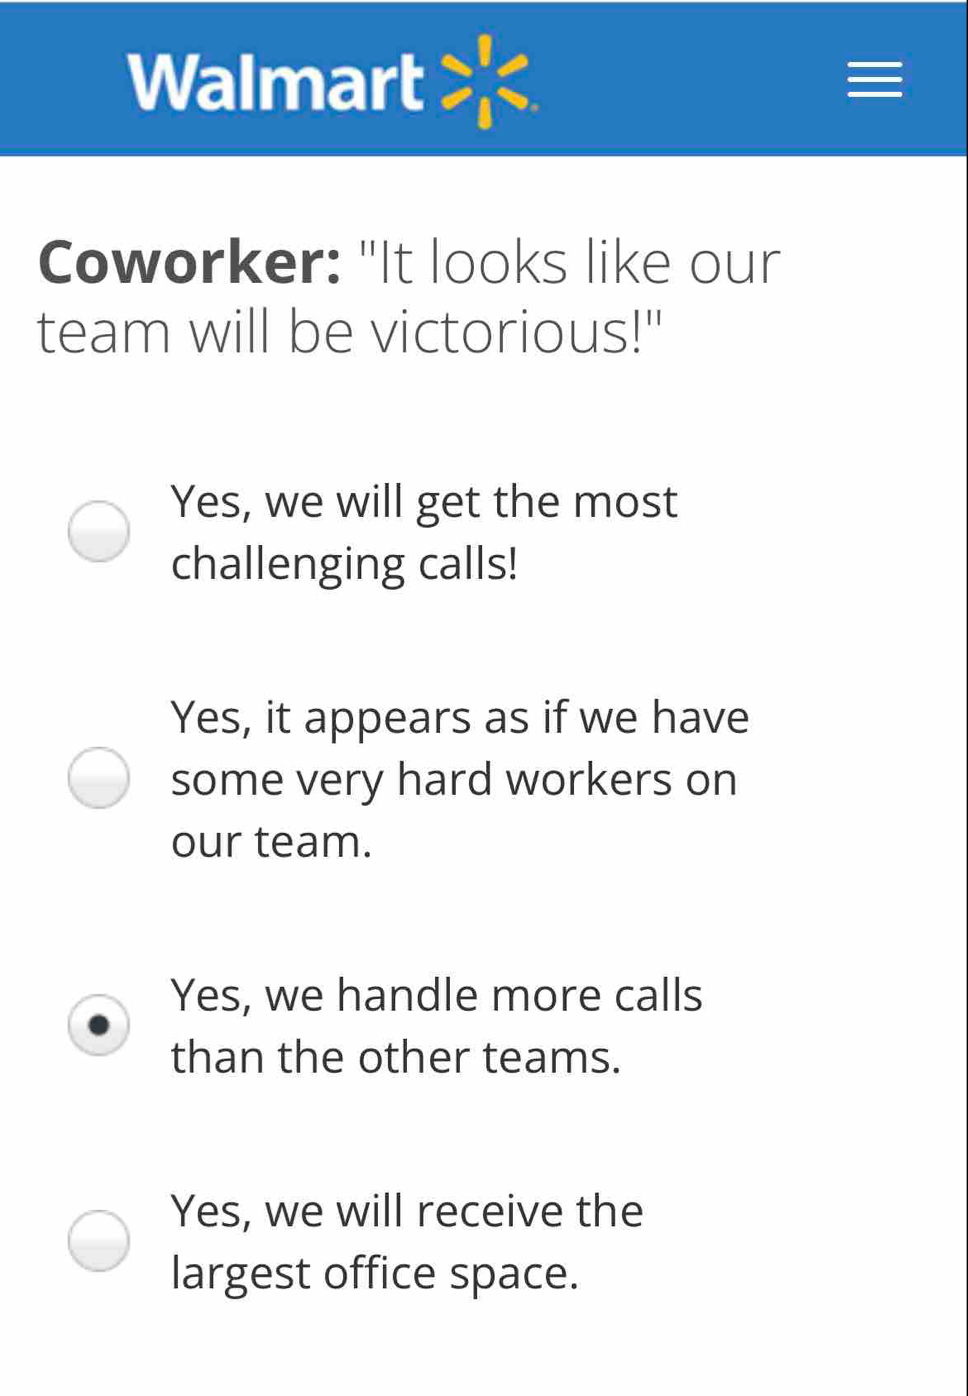 Walmart Coworker: "It looks like our team will be victorious!" Yes, we will get the most challenging calls! Yes, it appears as if we have some very hard workers on our team. Yes, we handle more calls than the other teams. Yes, we will receive the largest office space.